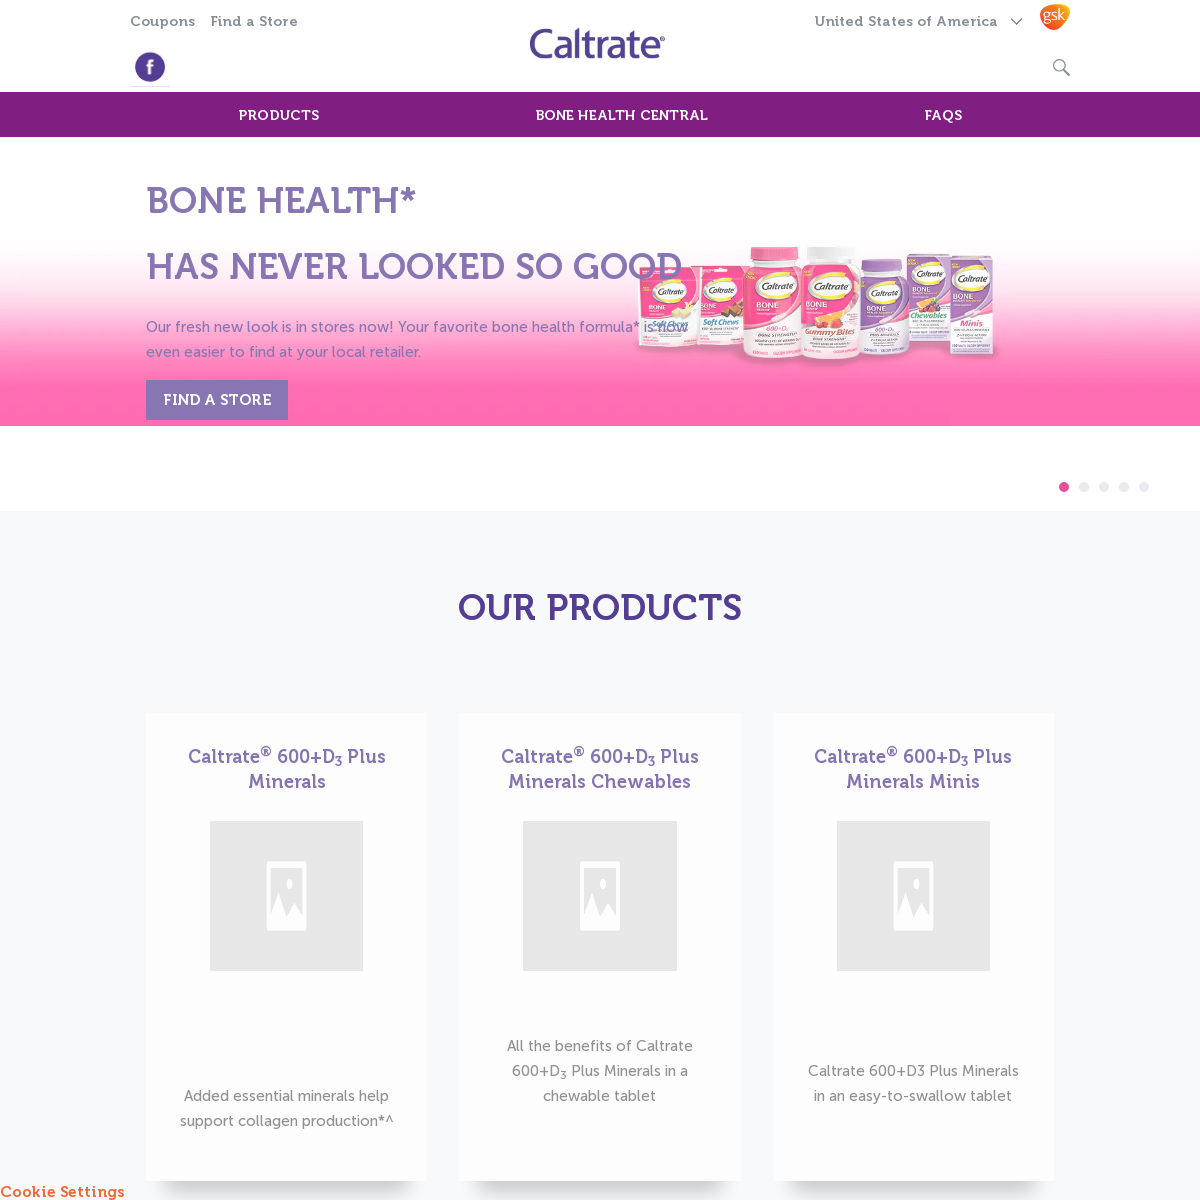 A complete backup of caltrate.com